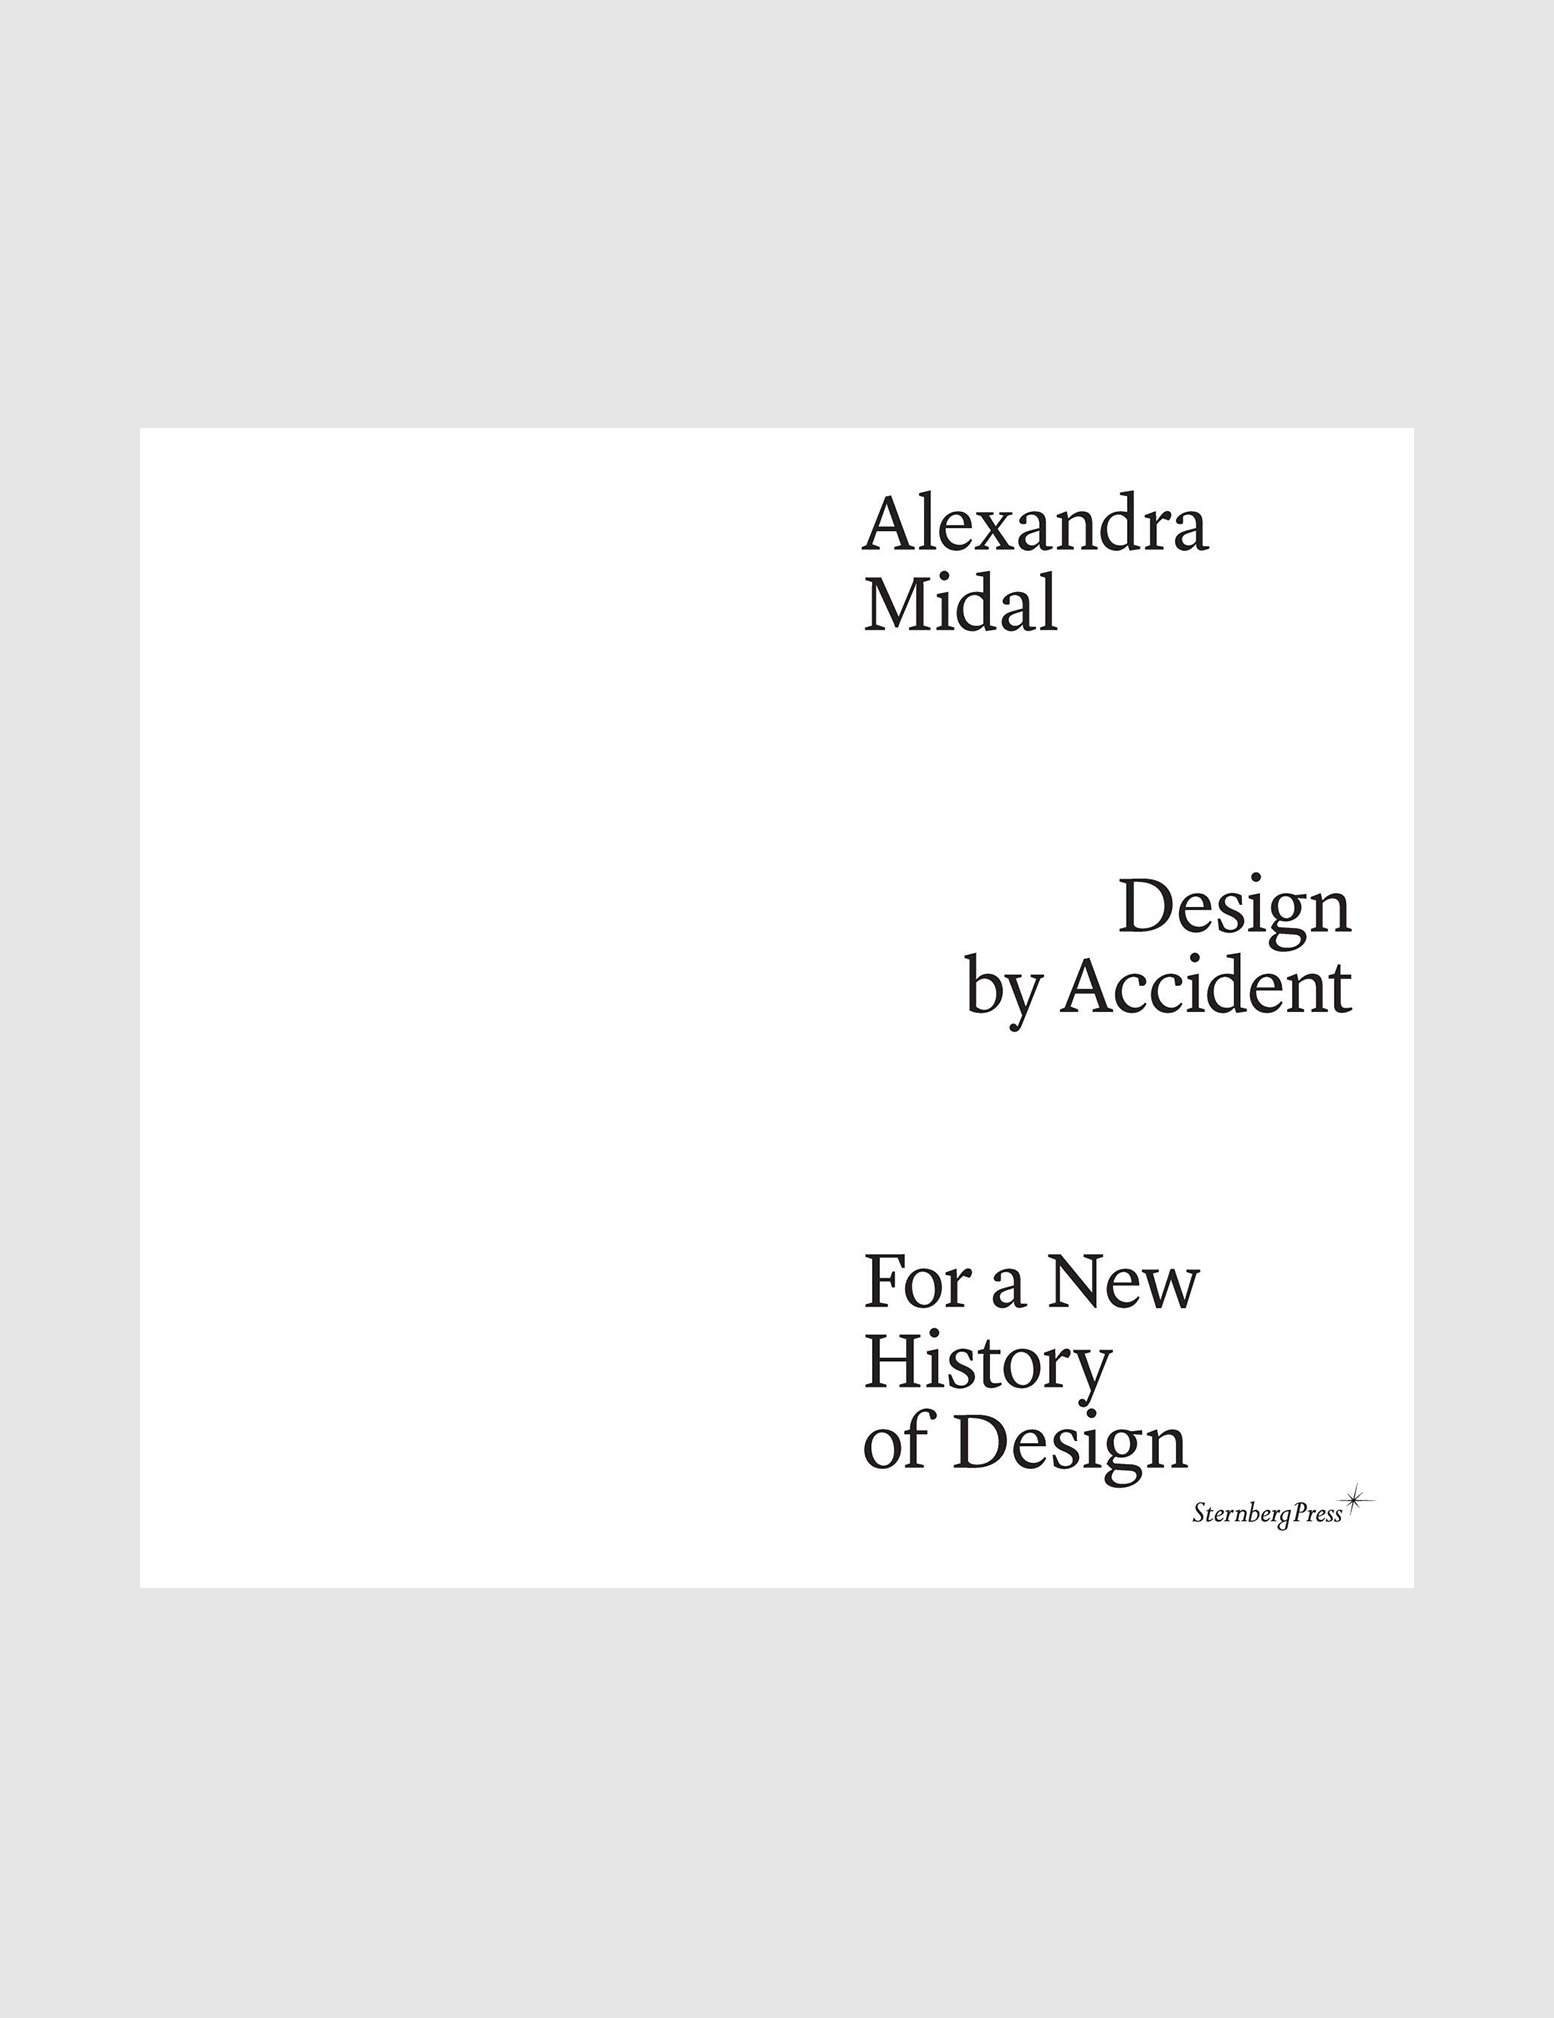 Design by Accident - For a New History of Design (reprint)